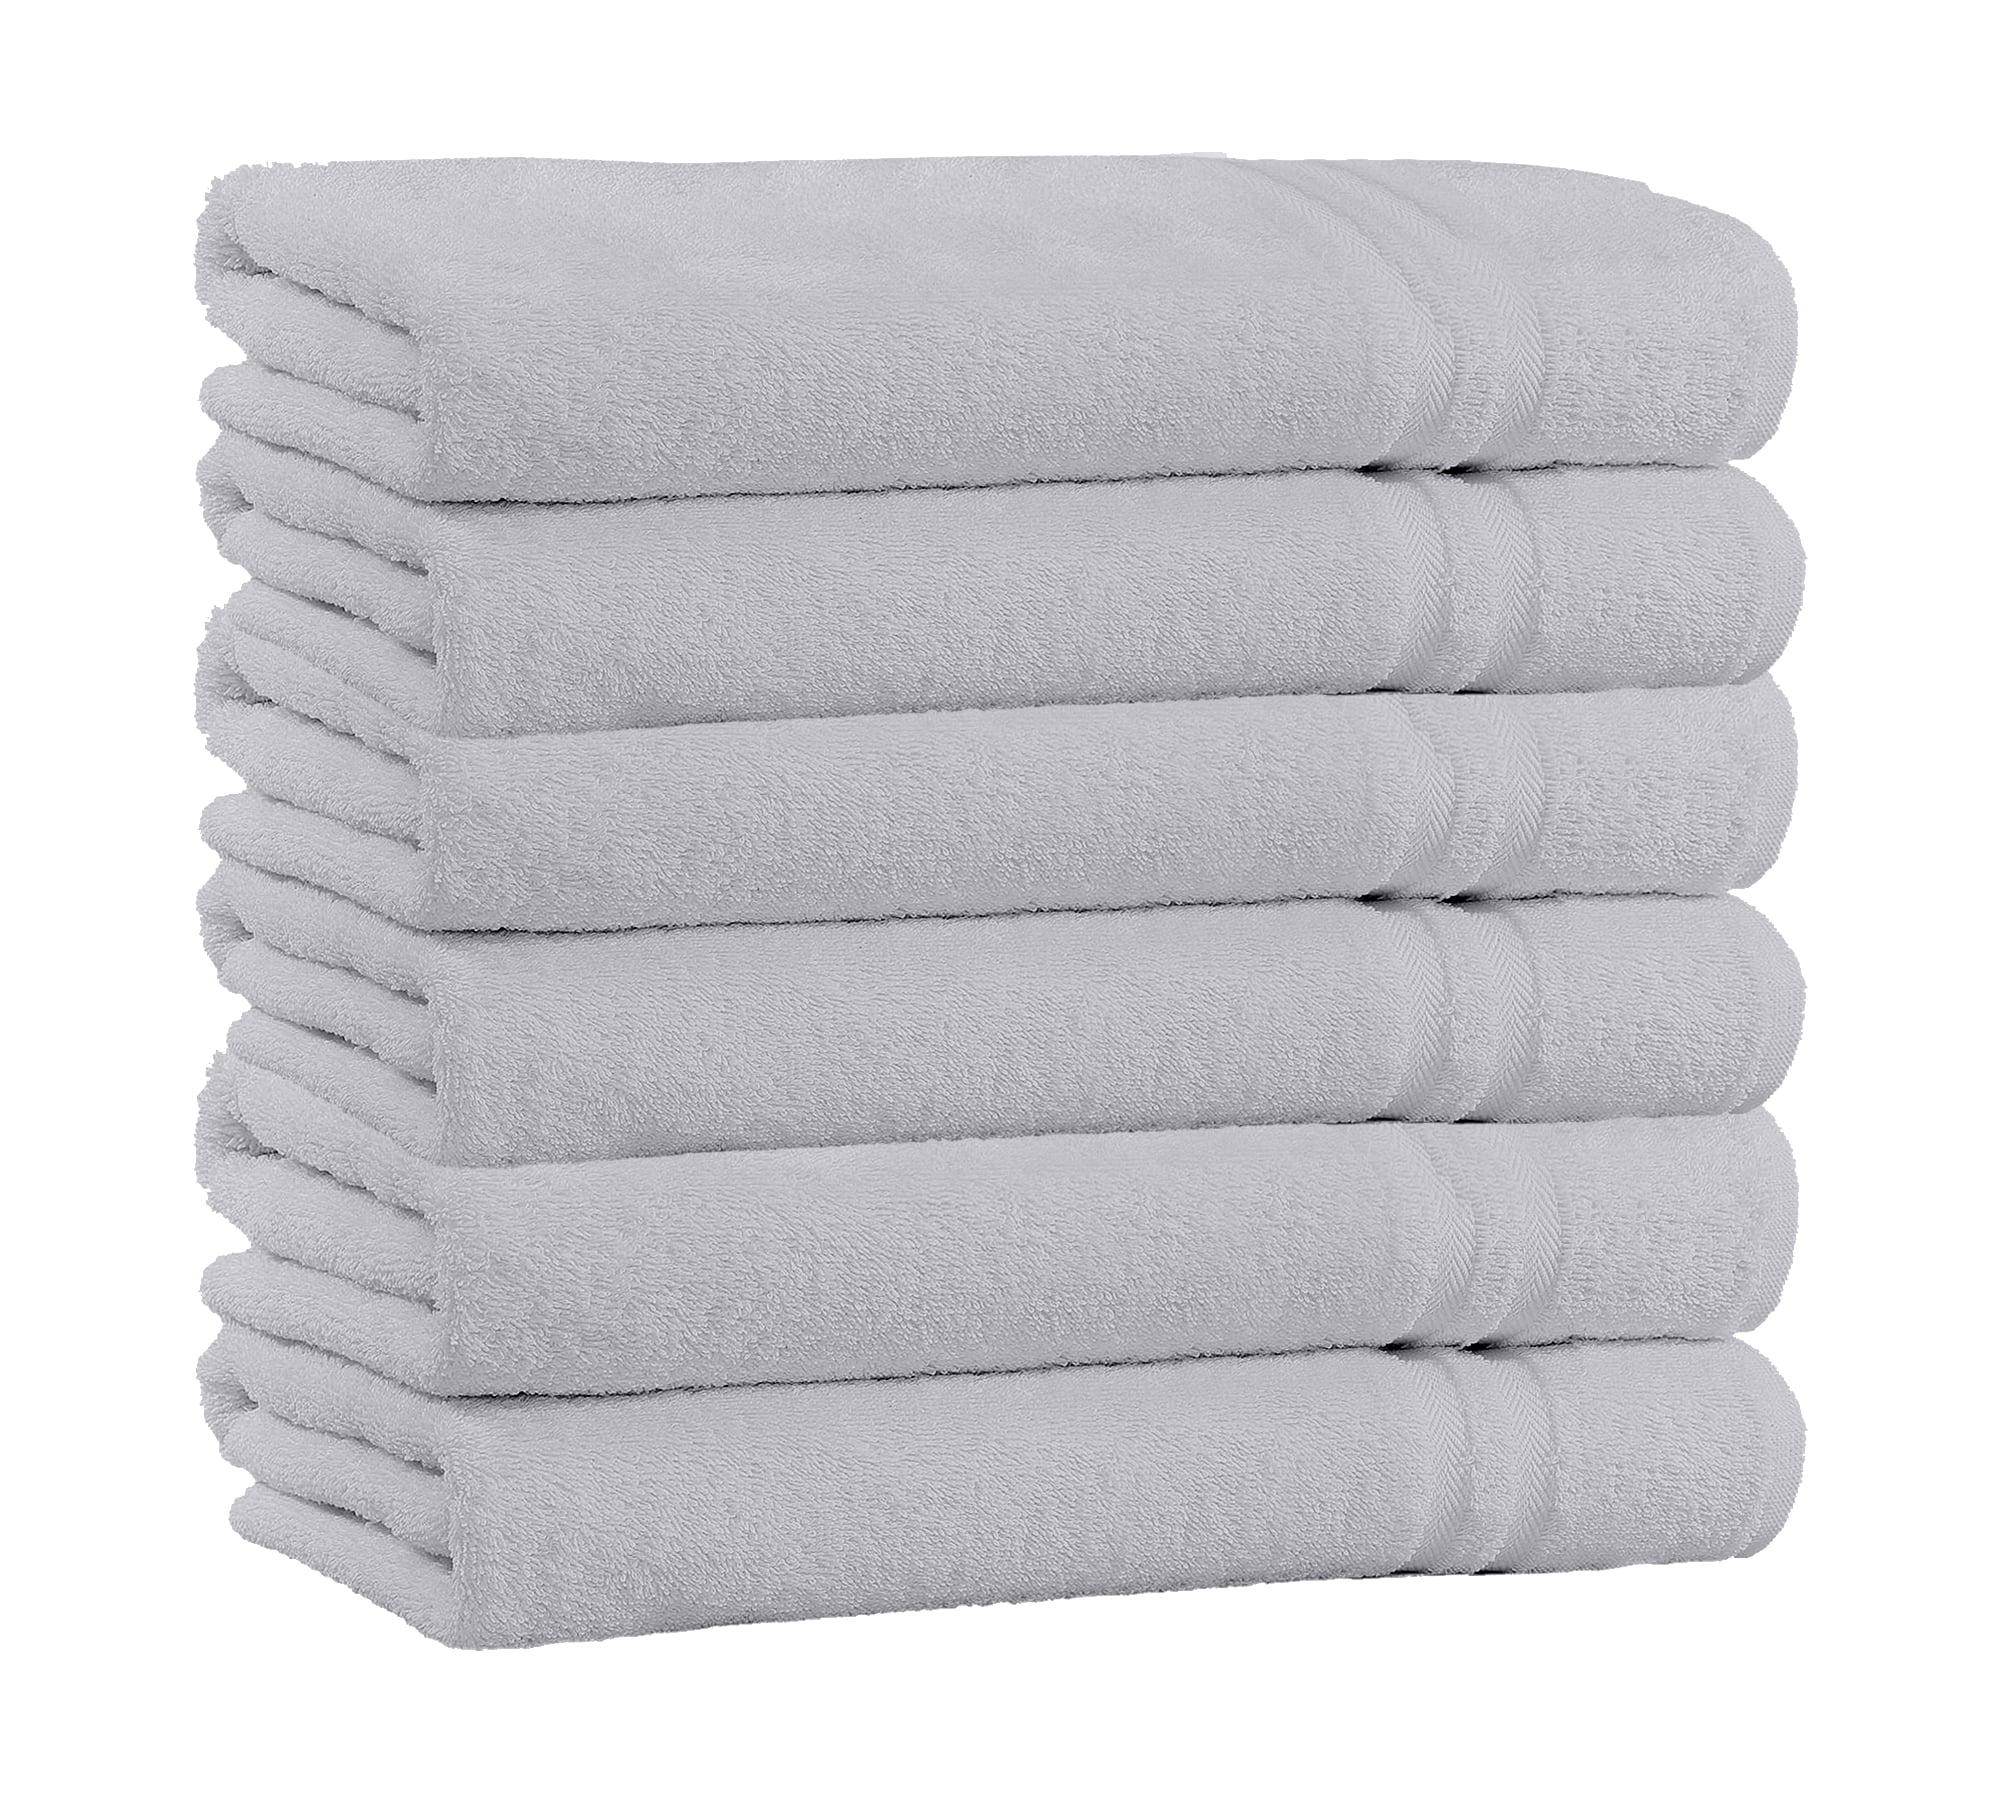 3 new white 100% cotton hotel bath towels 24x50 ships within 24 hours 